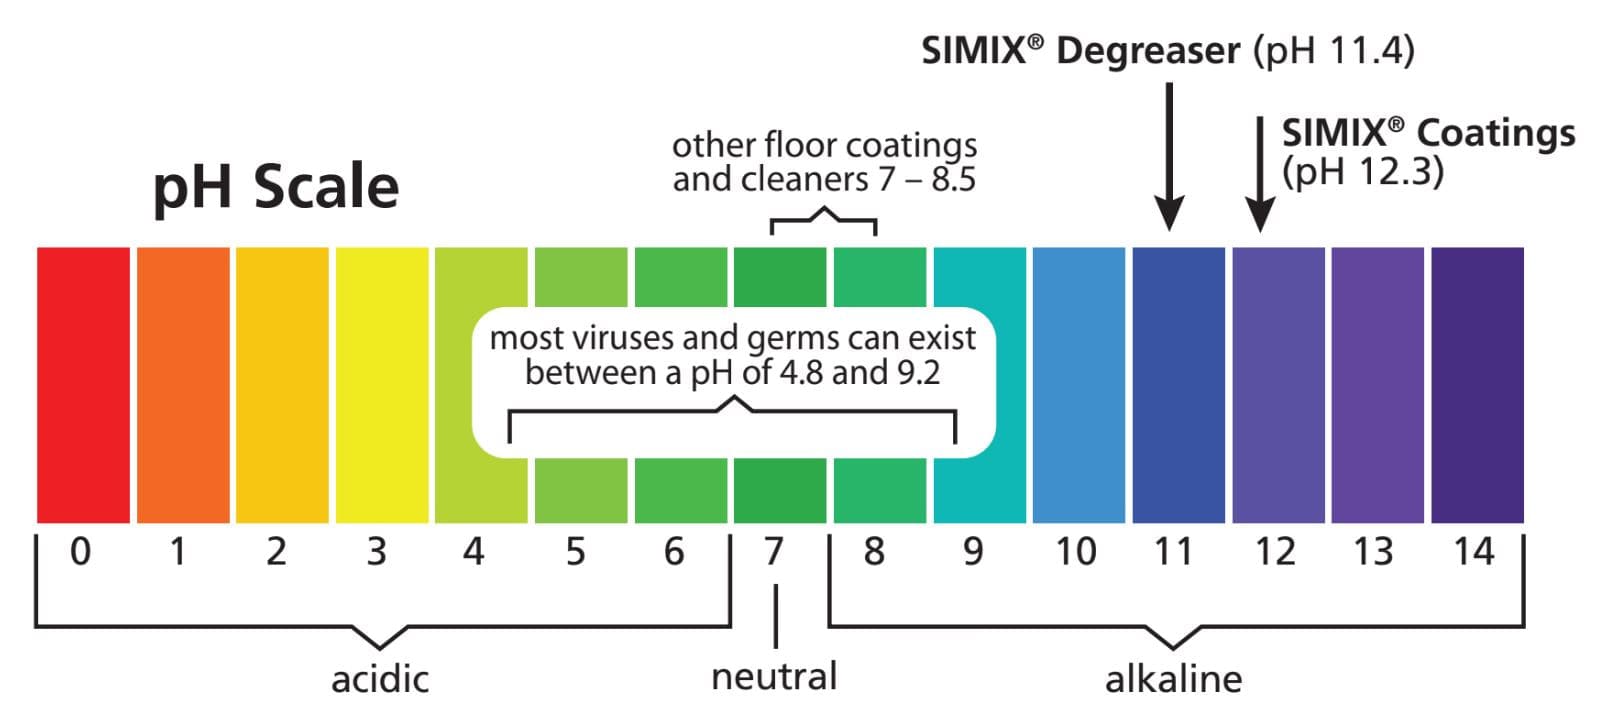 pH Scale with Simix Degreaser